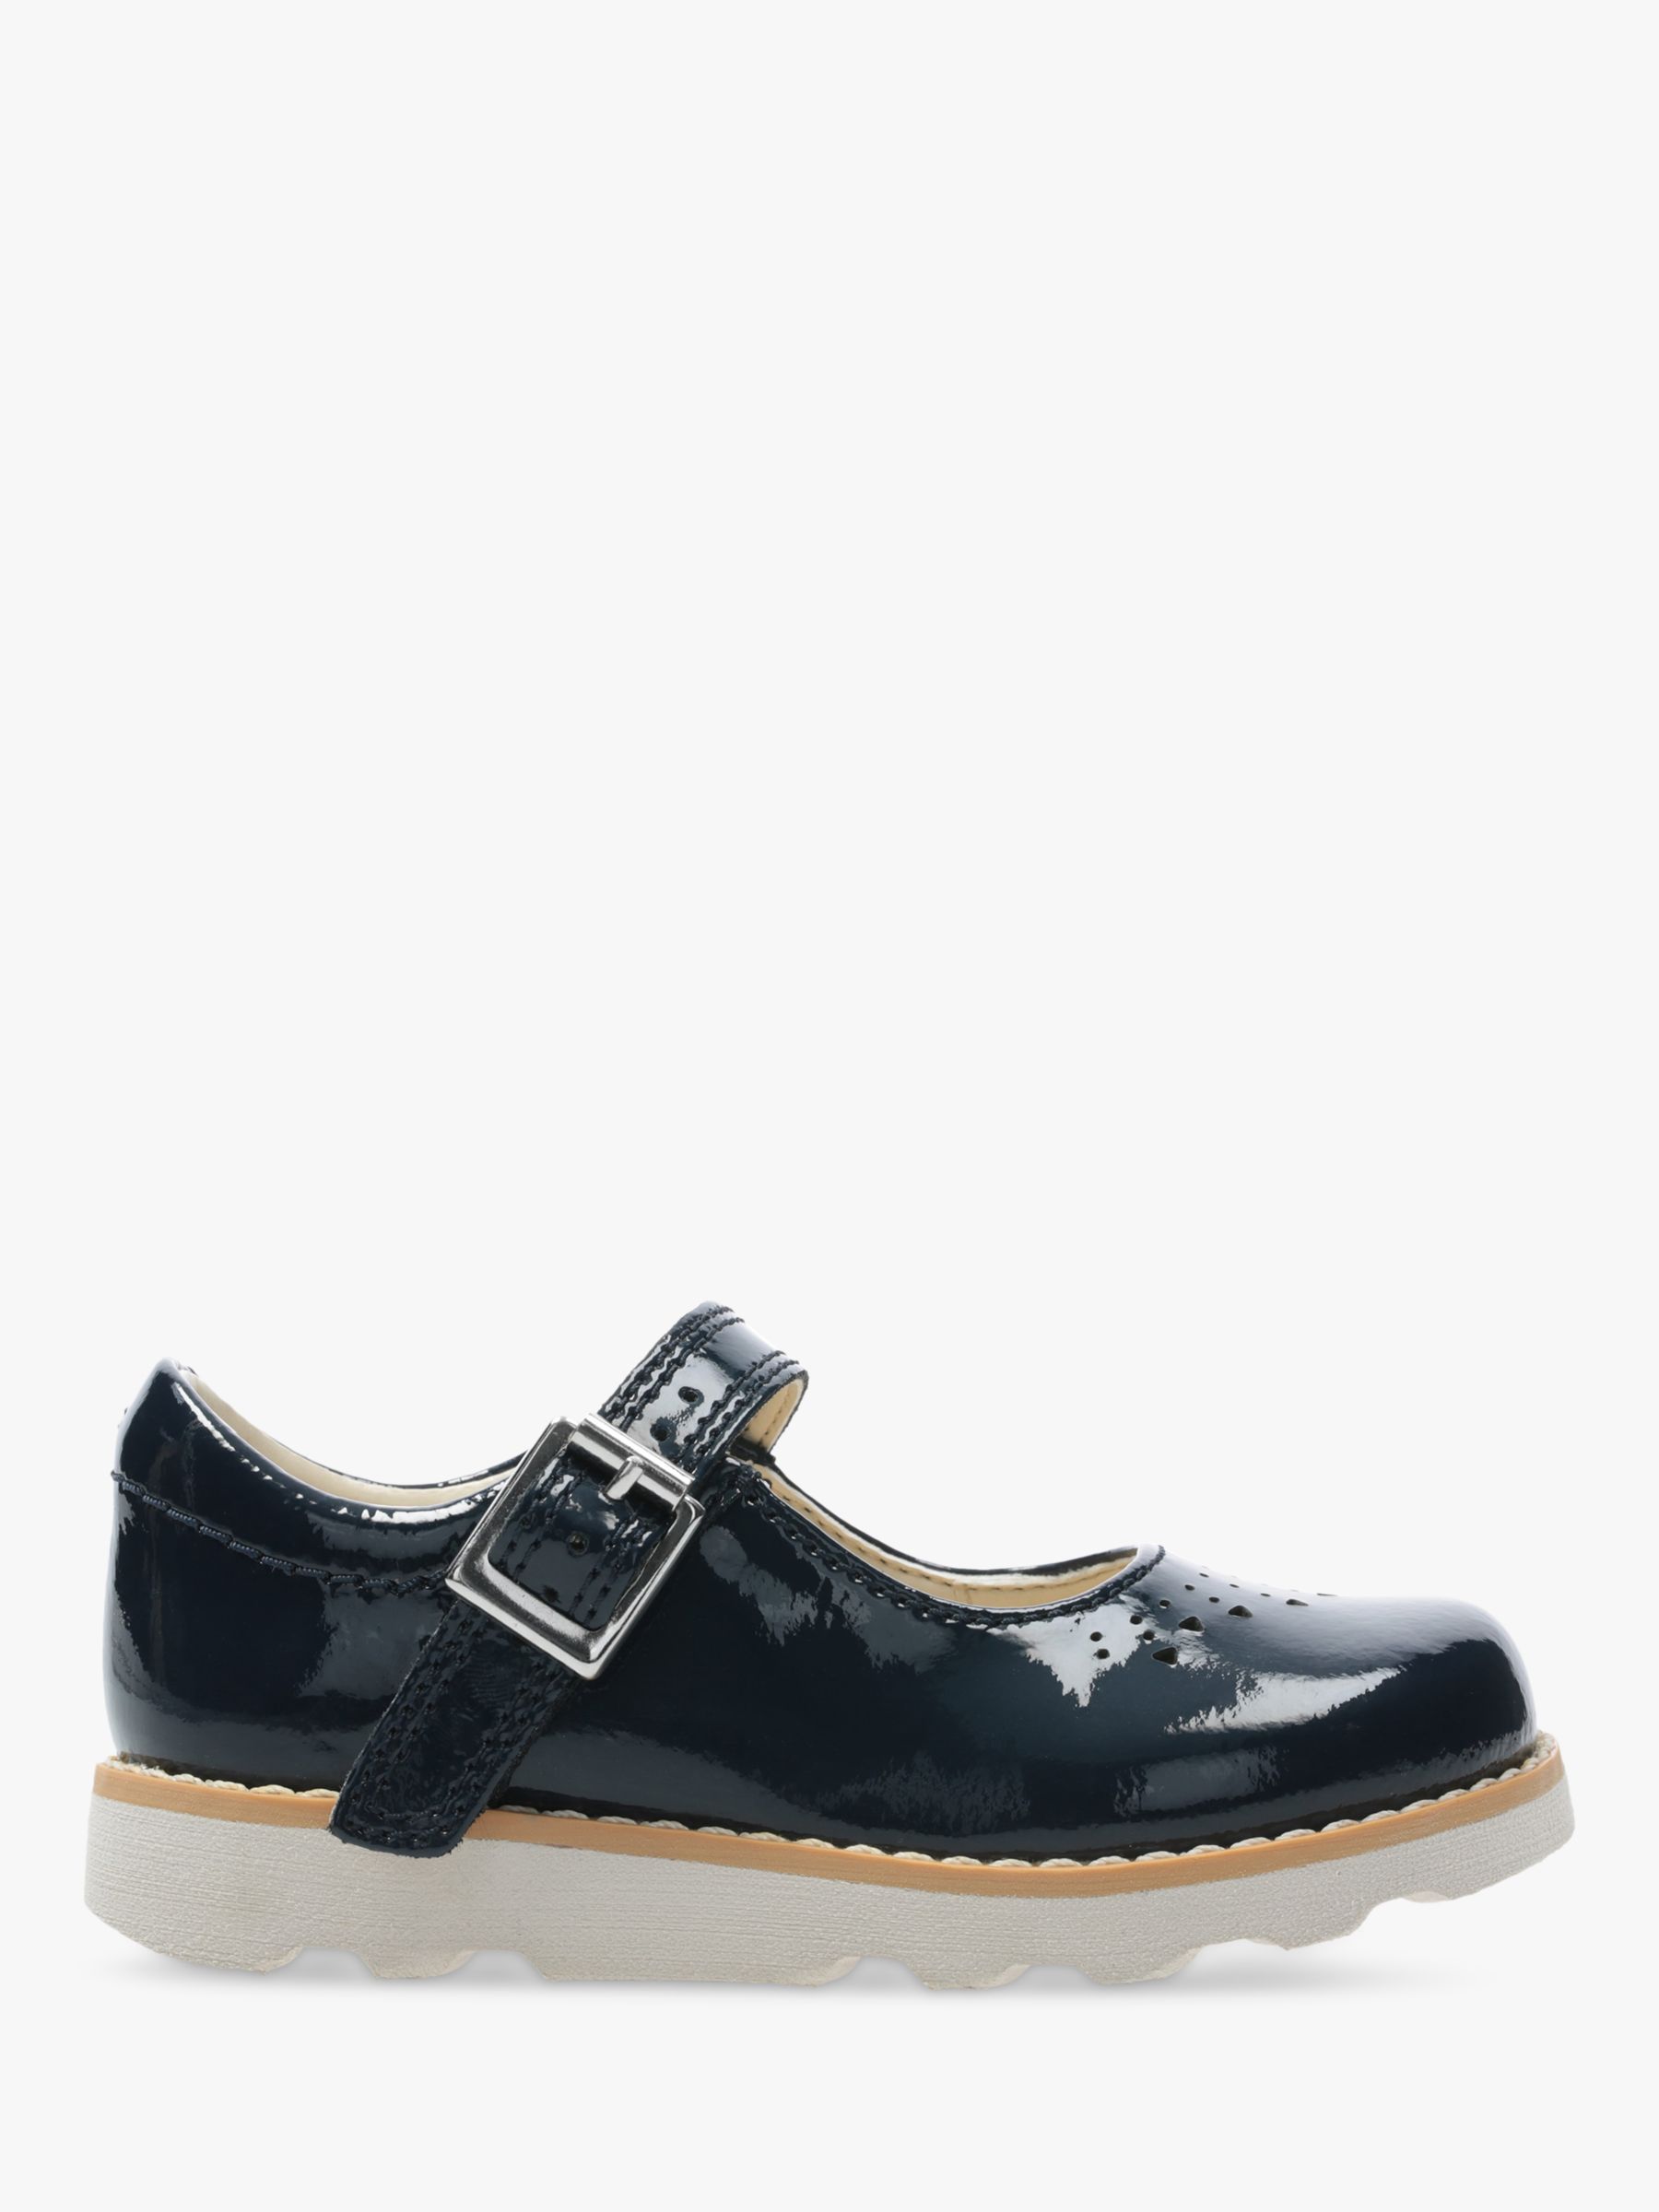 clarks crown shoes